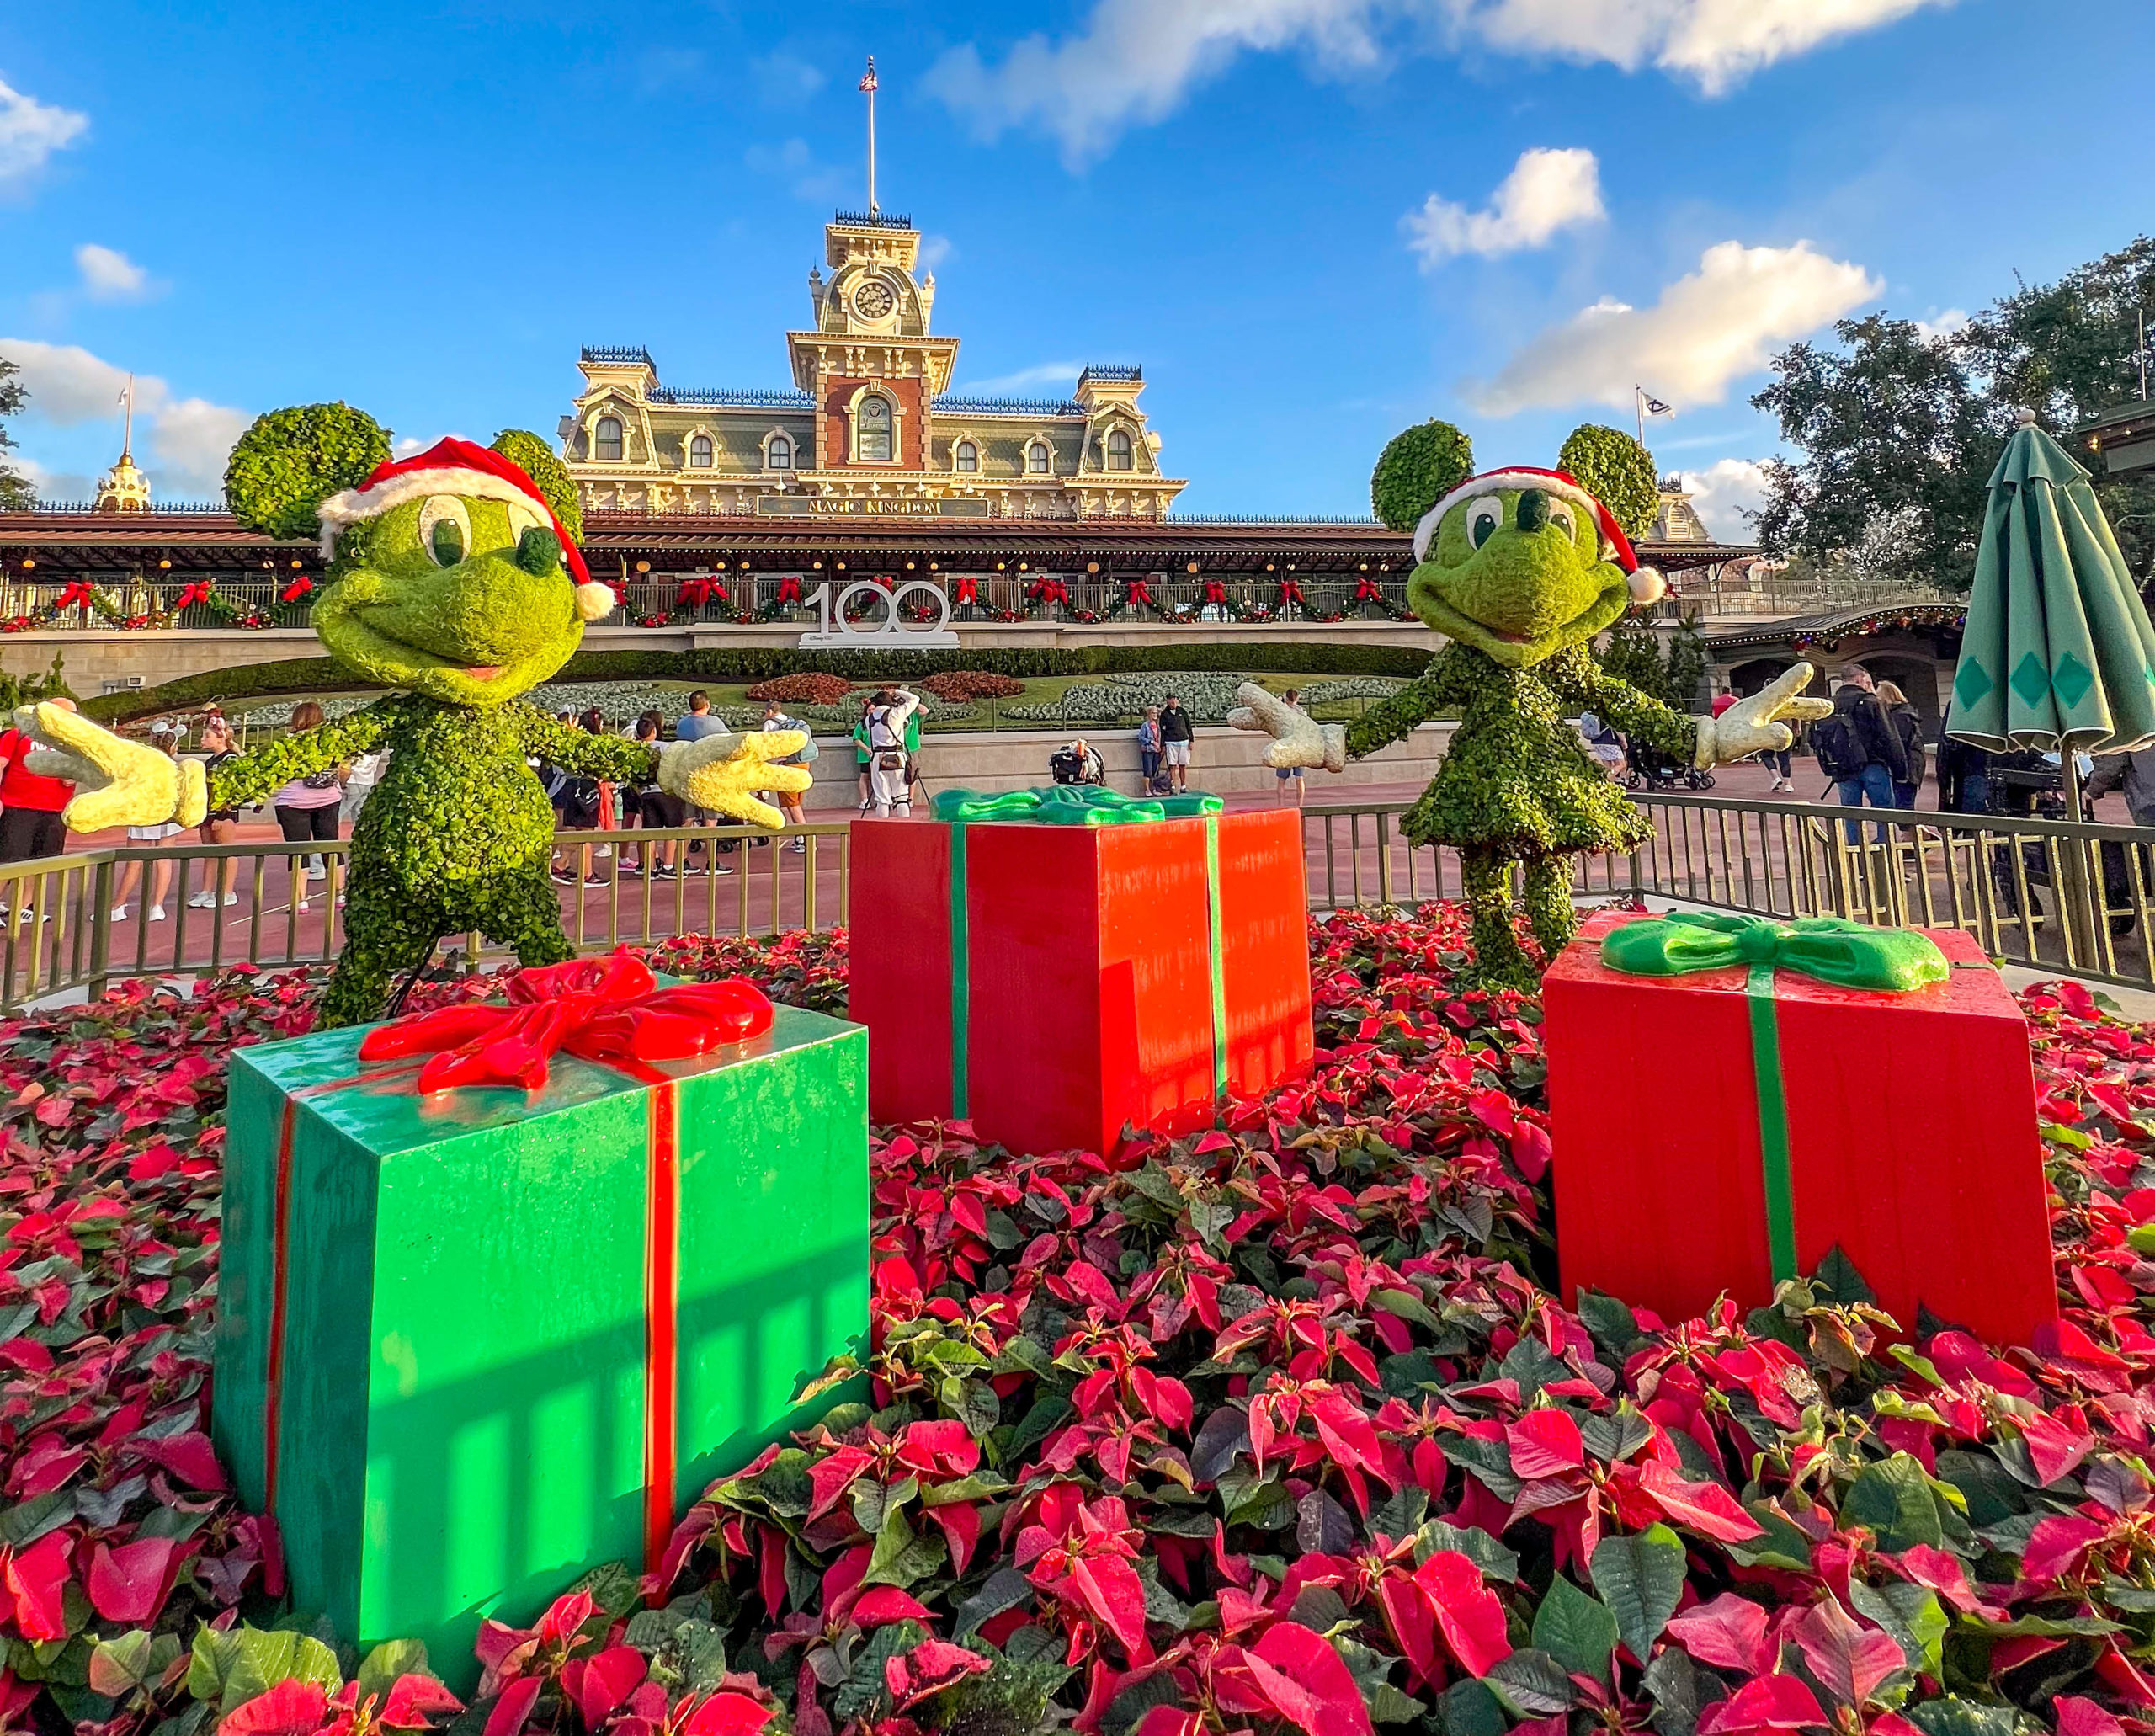 Mickey & Minnie holiday topiaries